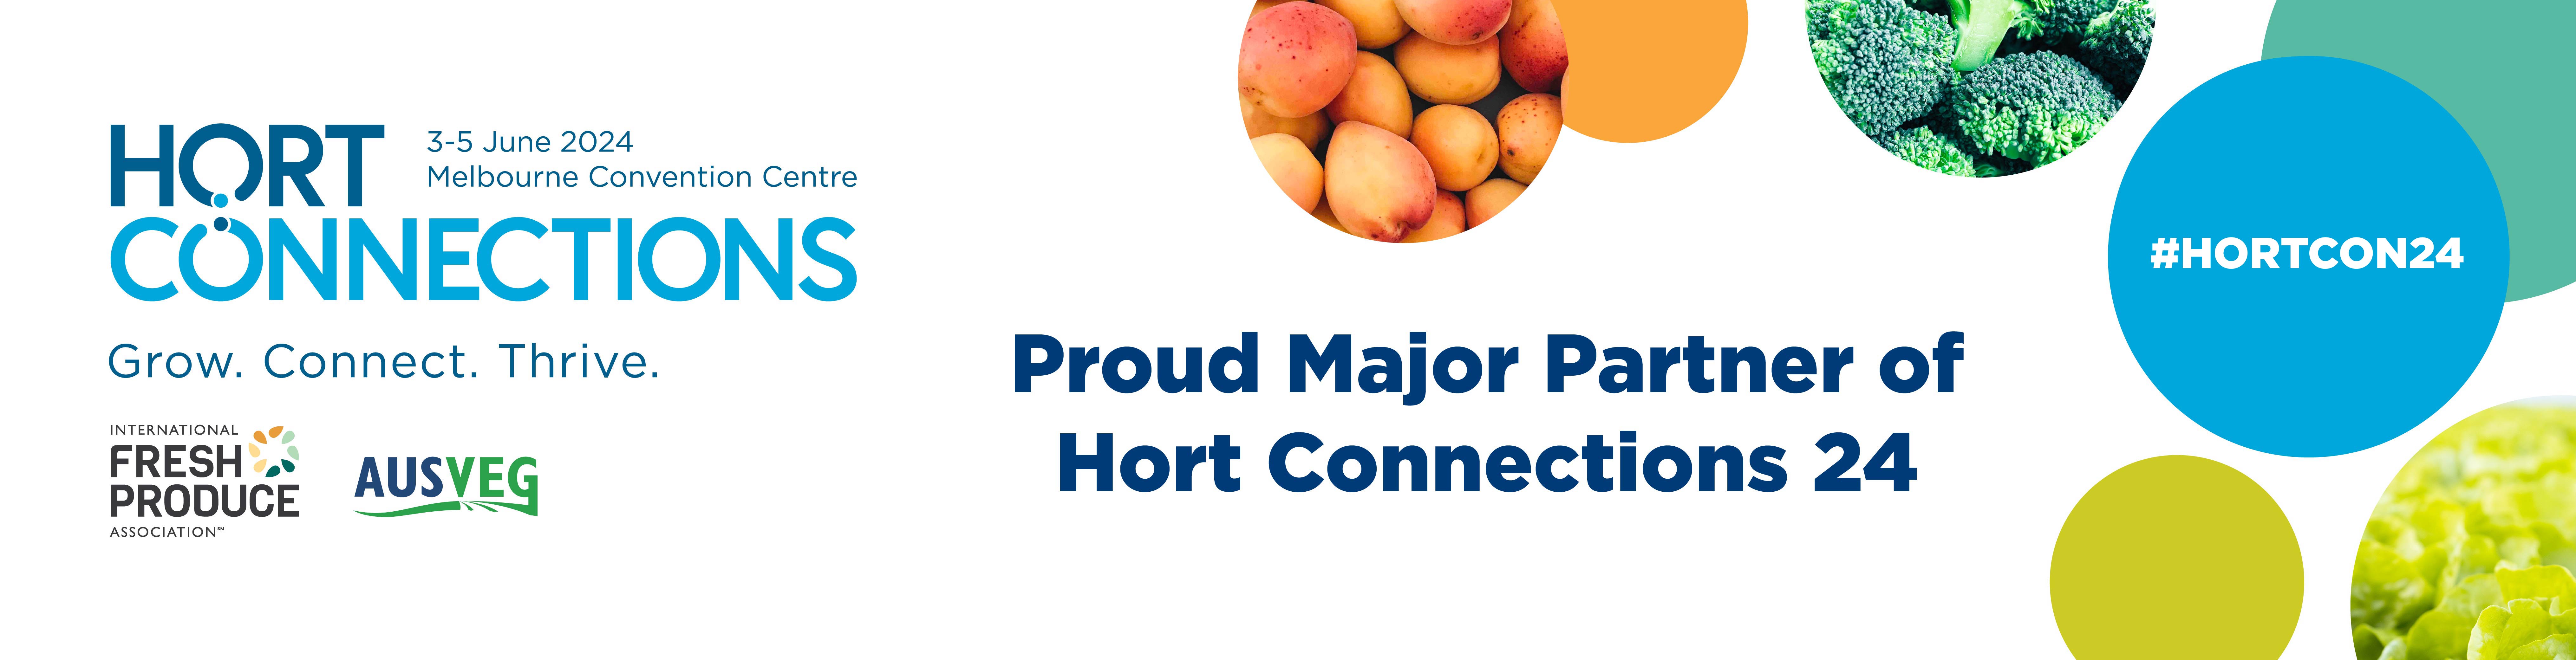 HORT Connections 